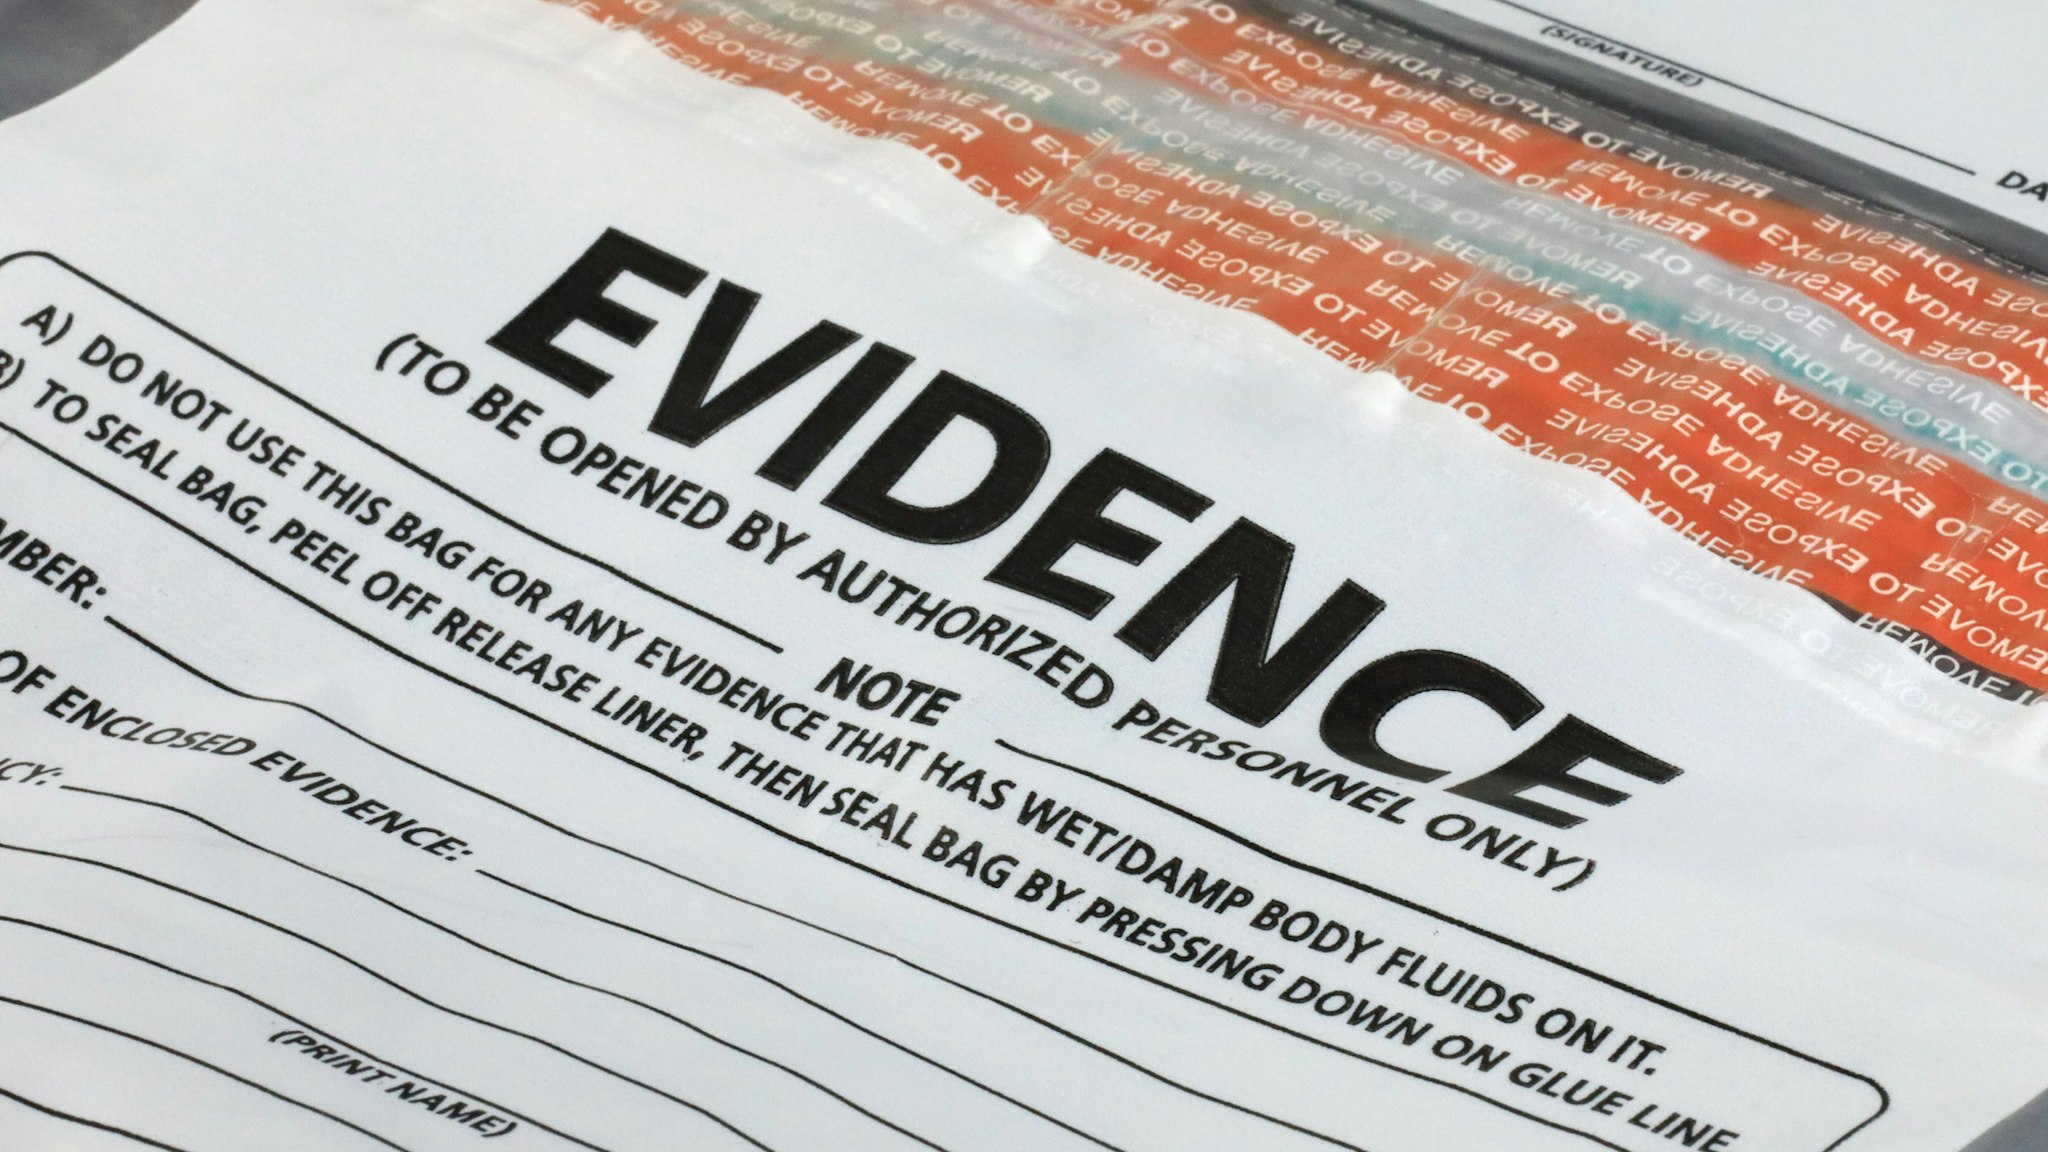 Evidence container for crime scene investigation - stock photo